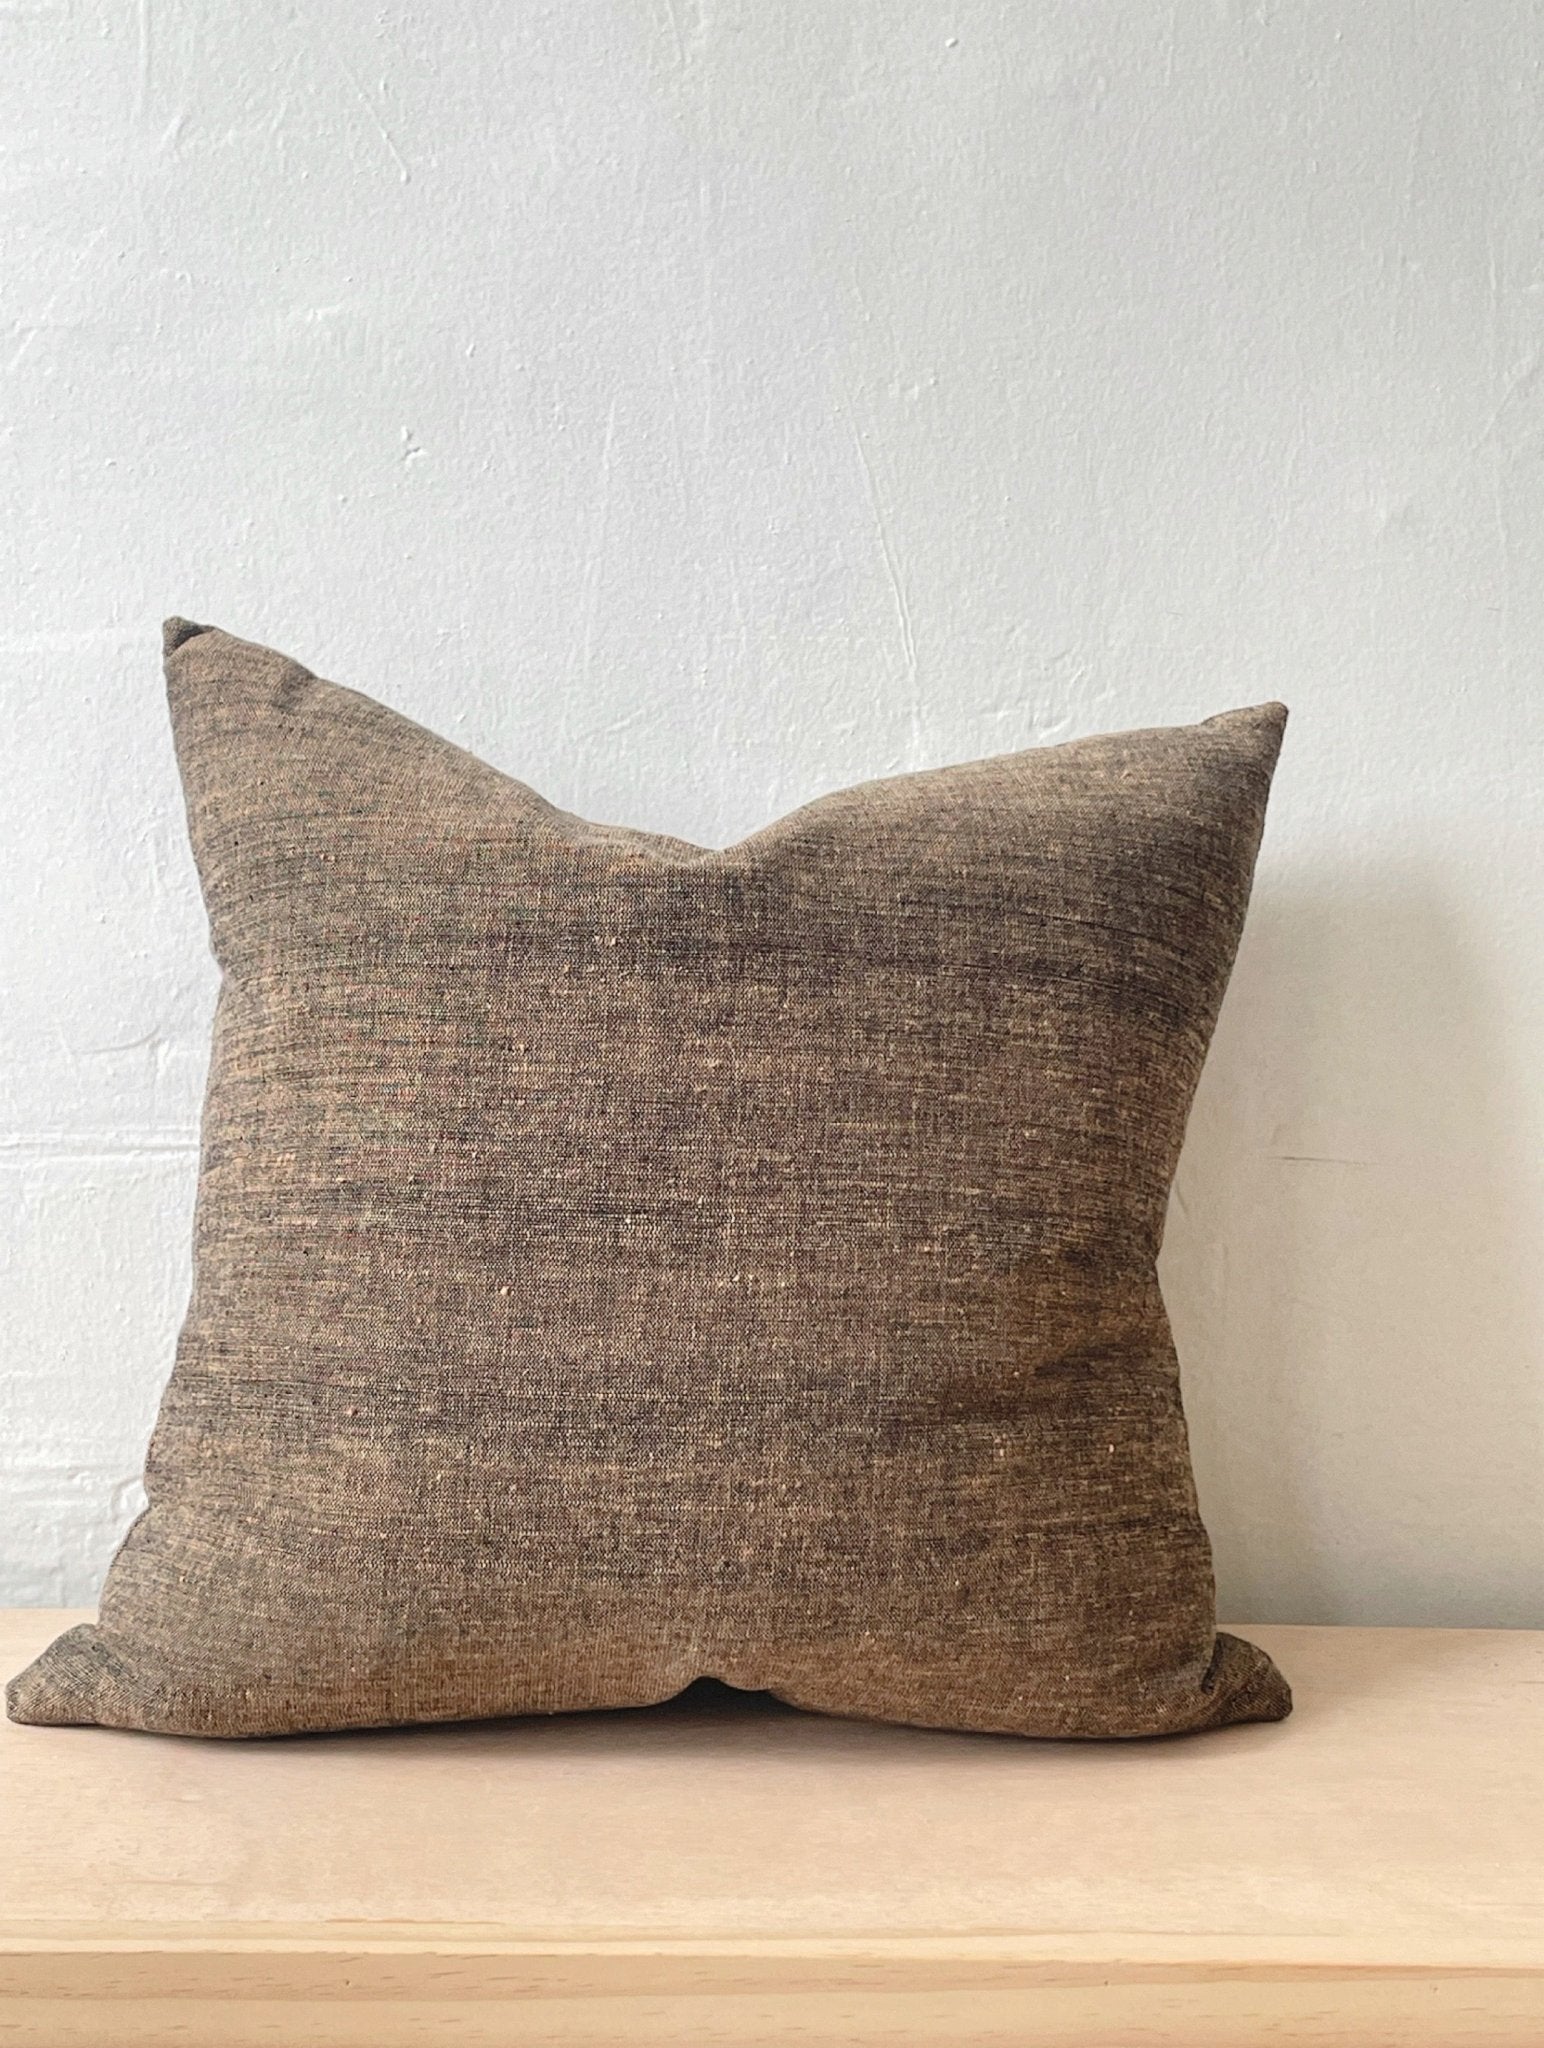 Pillow bundle - Earthy & Warm - Behind the Hill